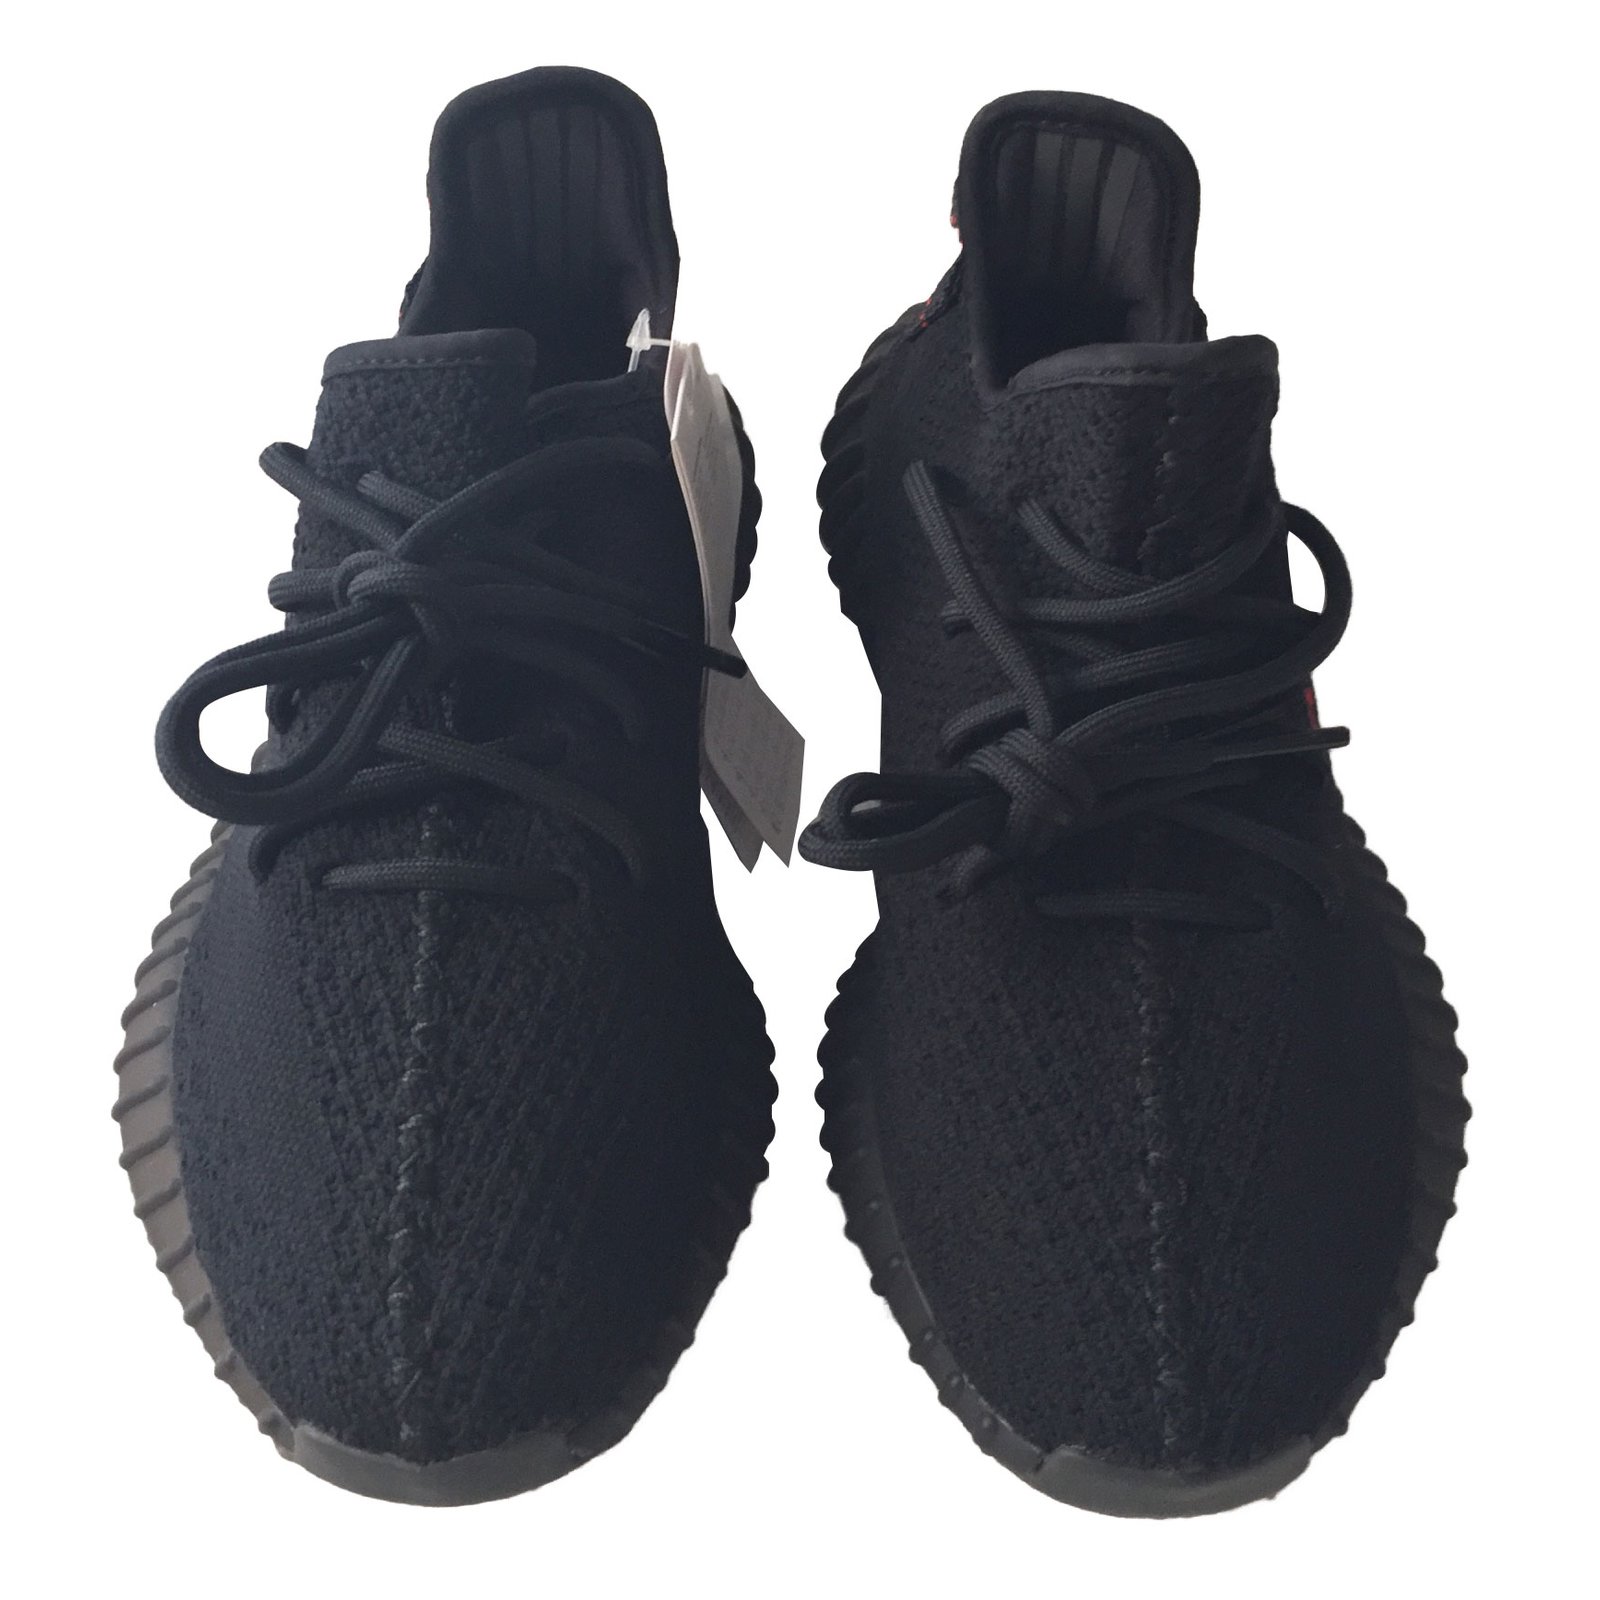 Parity > basket adidas yeezy boost, Up to 79% OFF